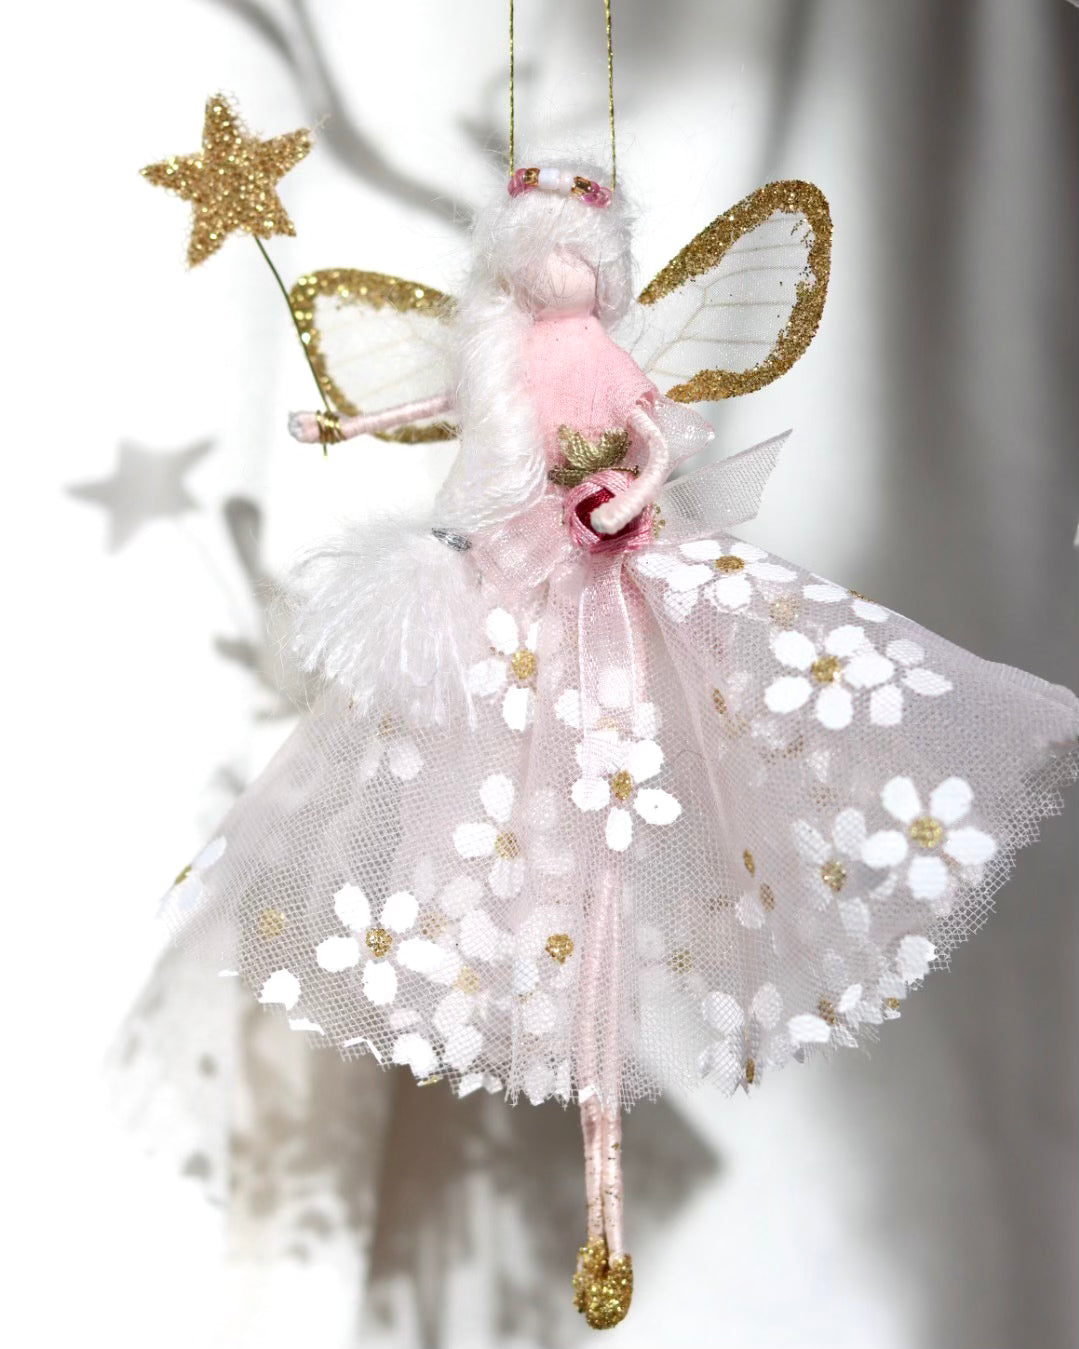 The Florialice Joy fairy brings love and happiness to you!